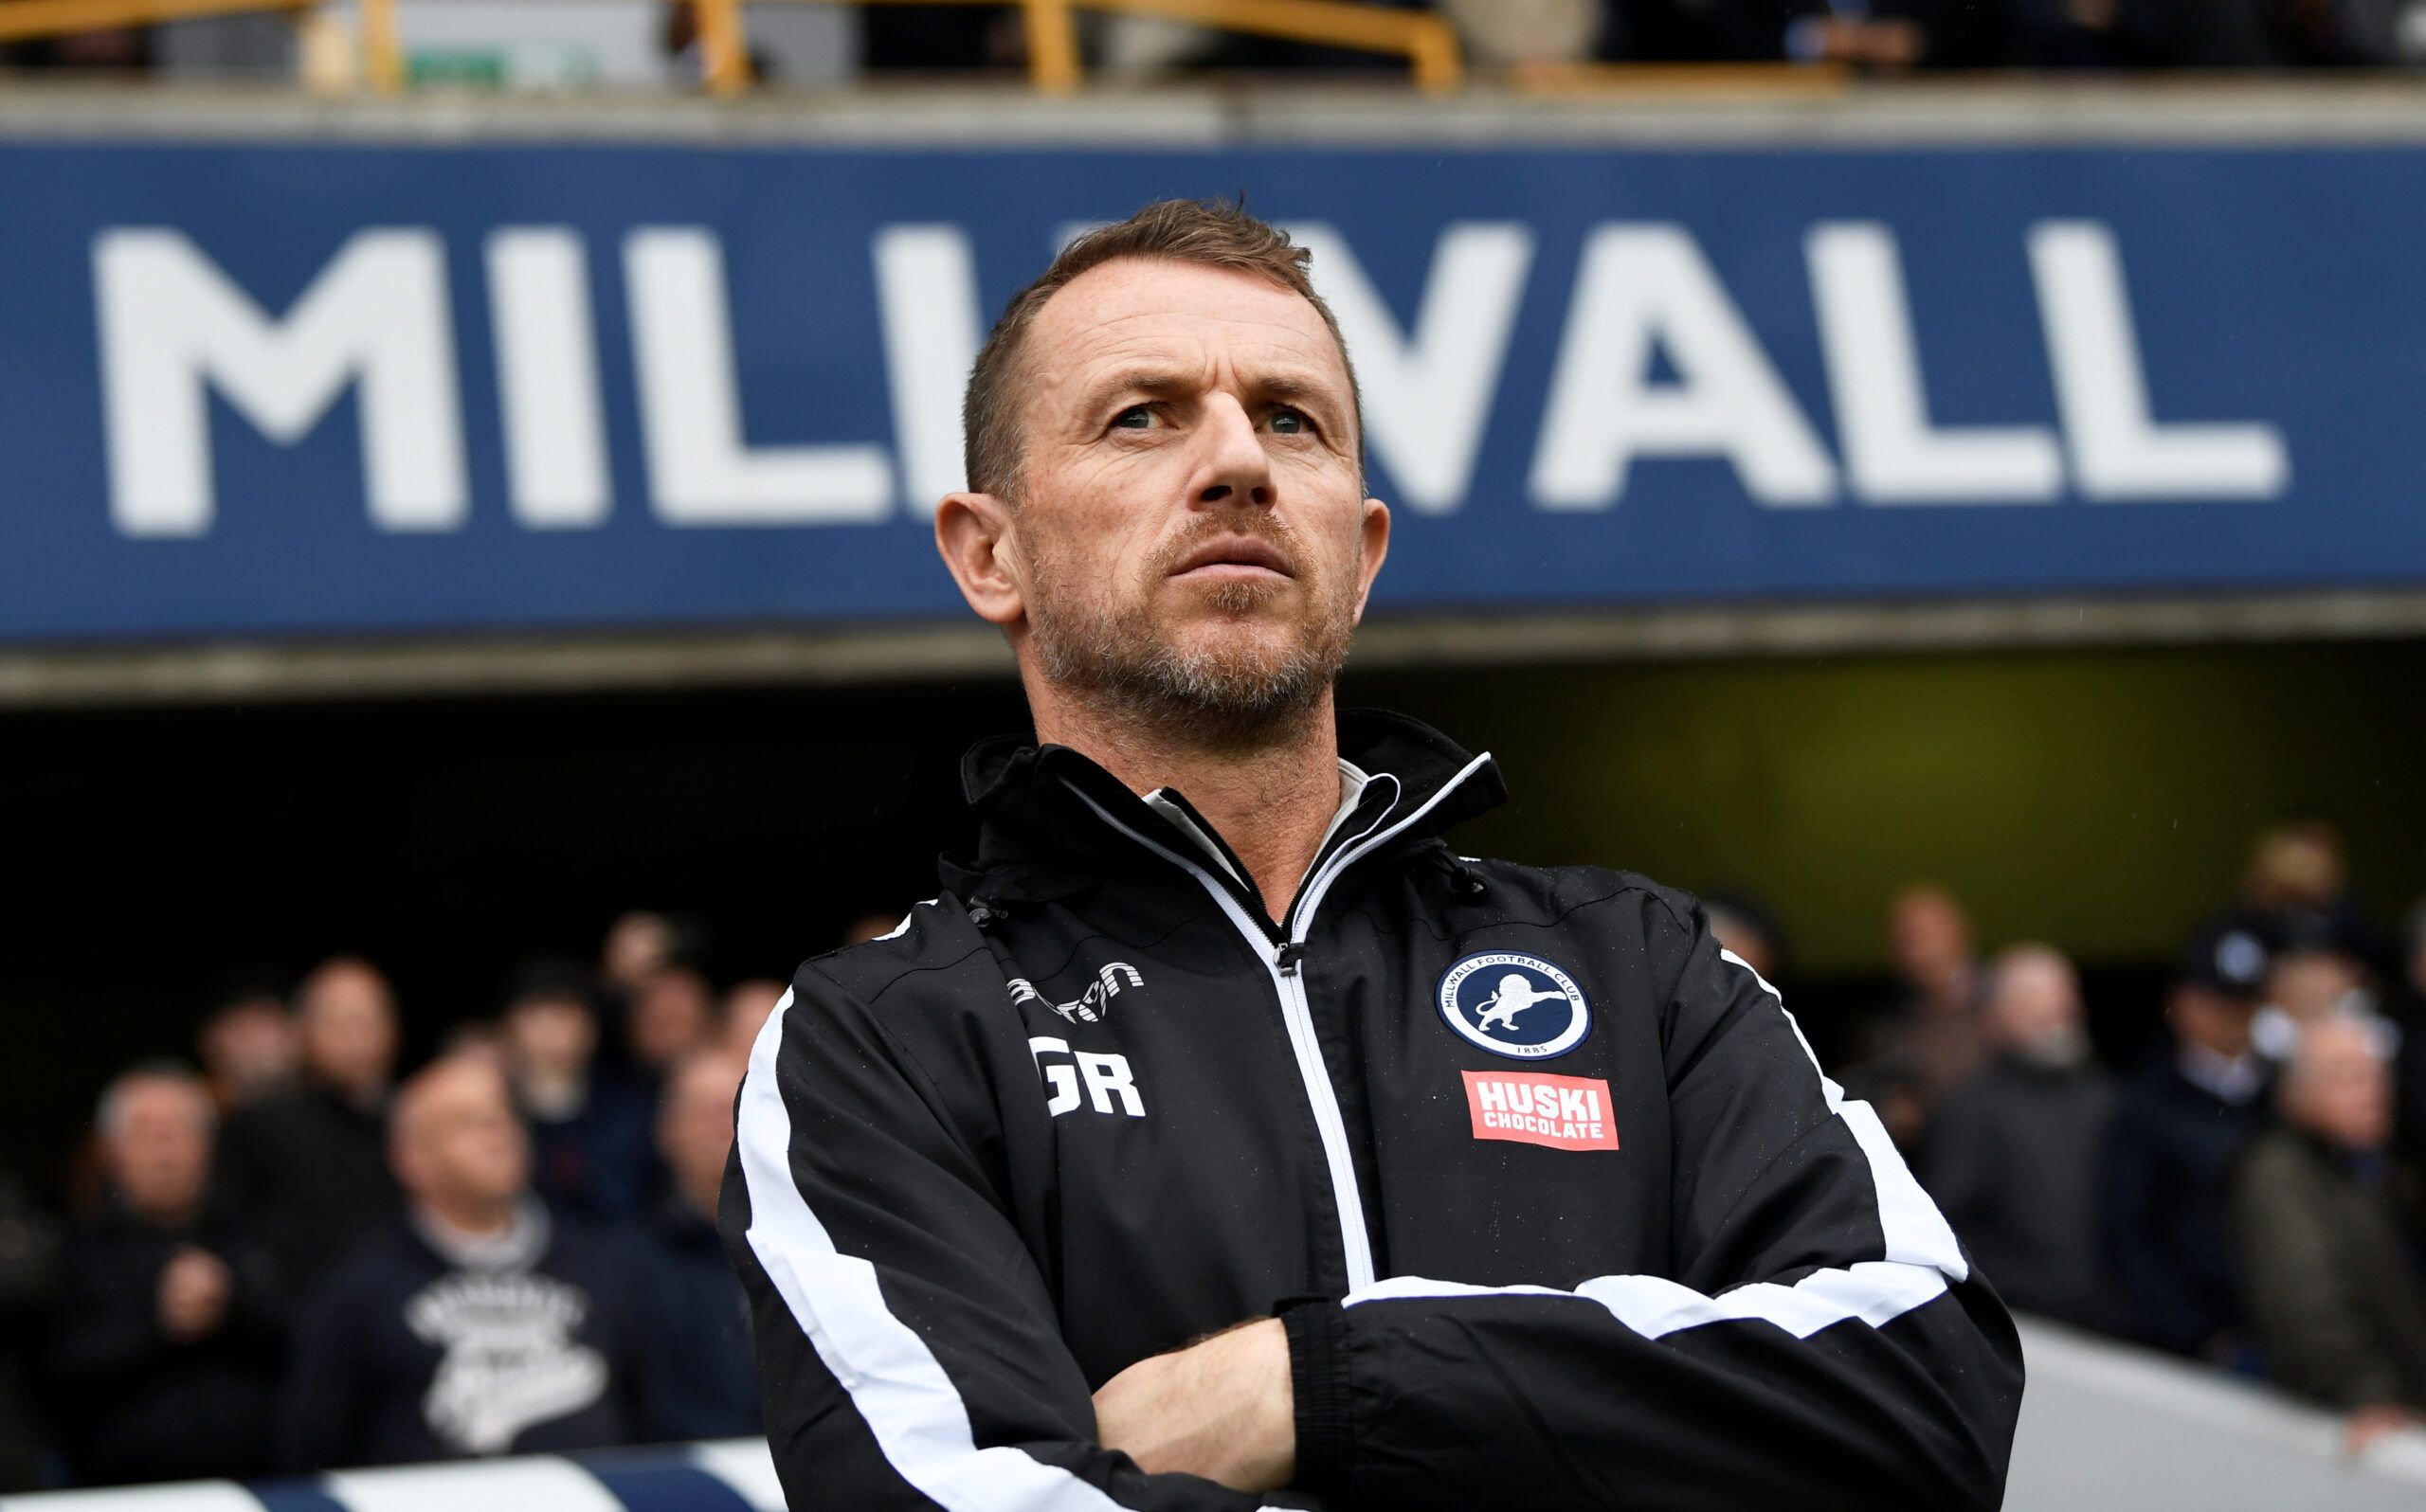 Soccer Football - Championship - Millwall v Stoke City - The Den, London, Britain - October 26, 2019  Millwall manager Gary Rowett  Action Images/Tony O'Brien  EDITORIAL USE ONLY. No use with unauthorized audio, video, data, fixture lists, club/league logos or 